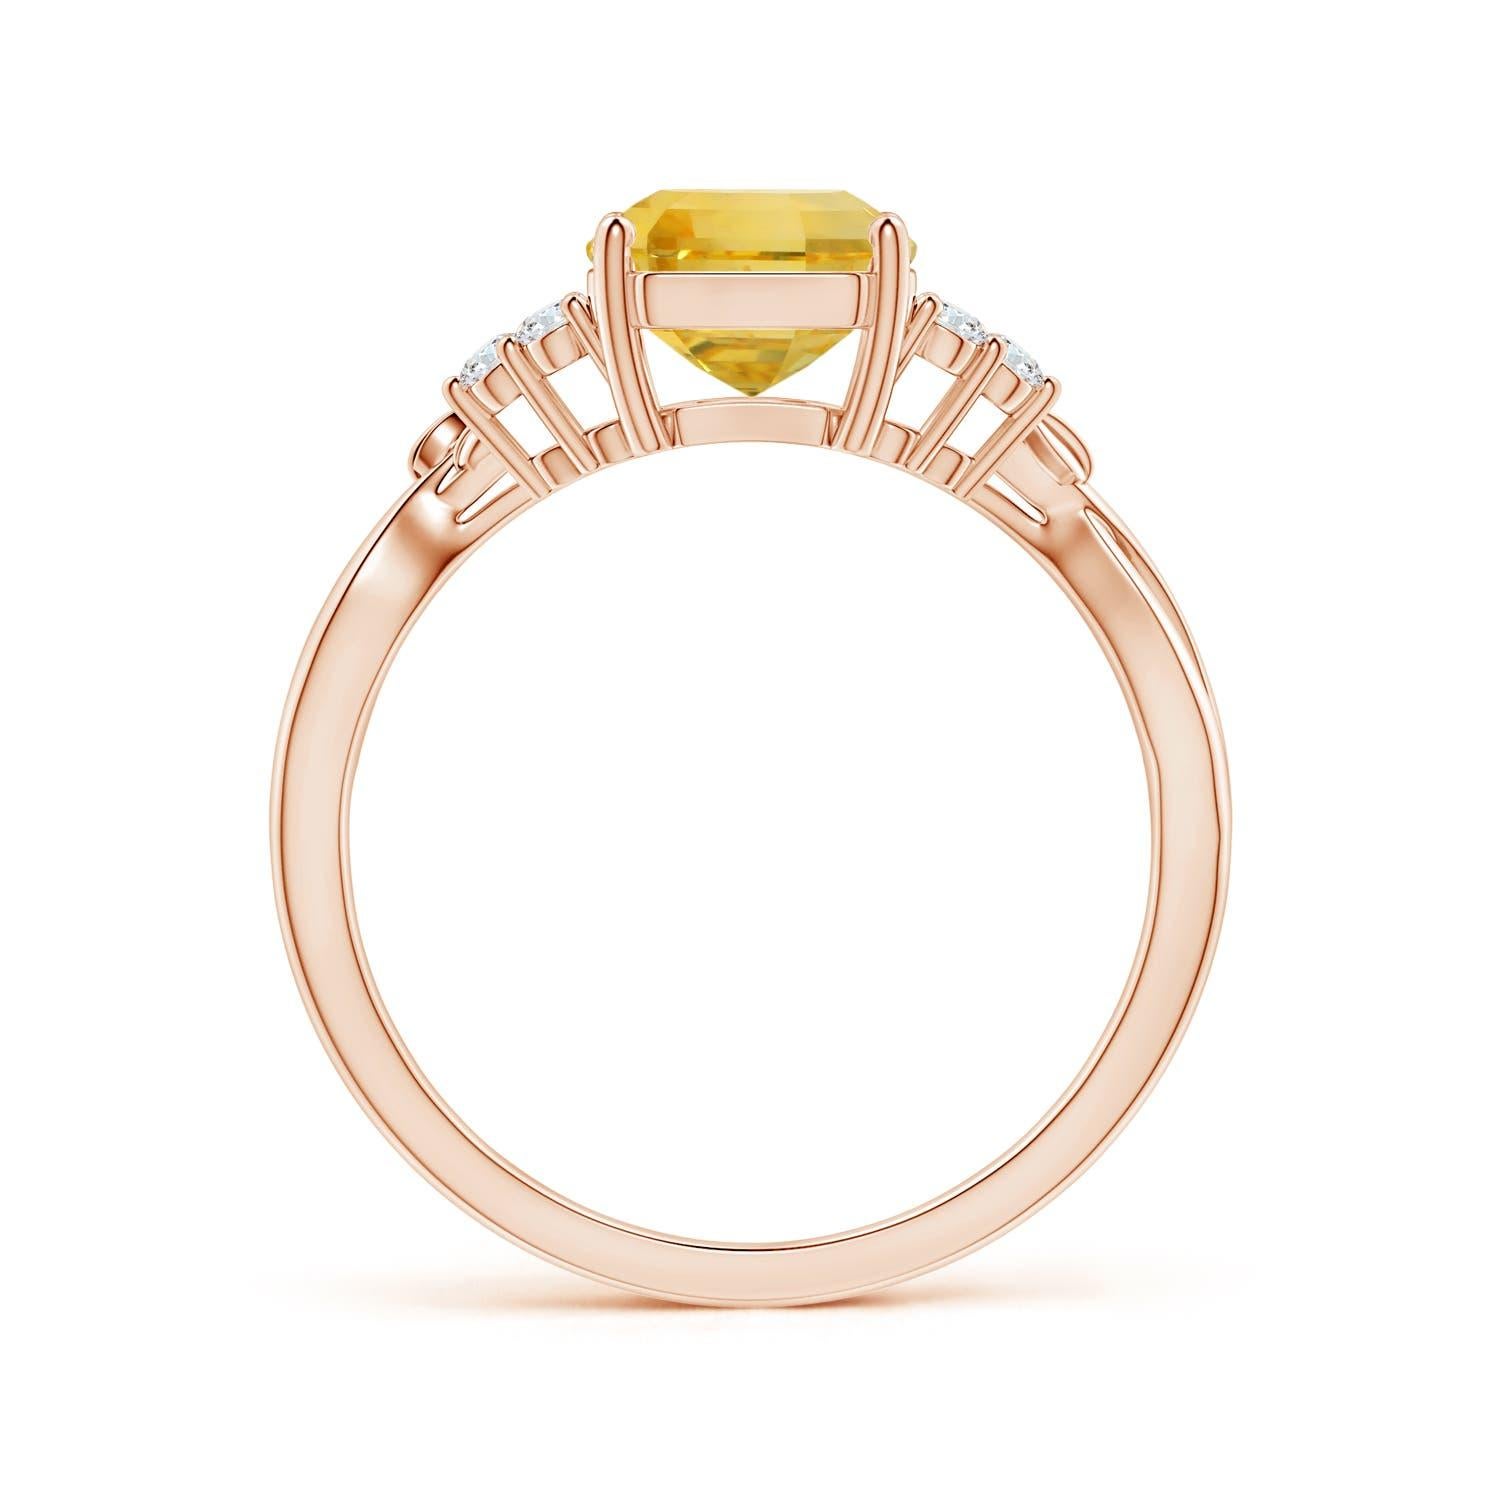 For Sale:  Angara Gia Certified Emerald-Cut Yellow Sapphire & Diamond Ring in Rose Gold 2